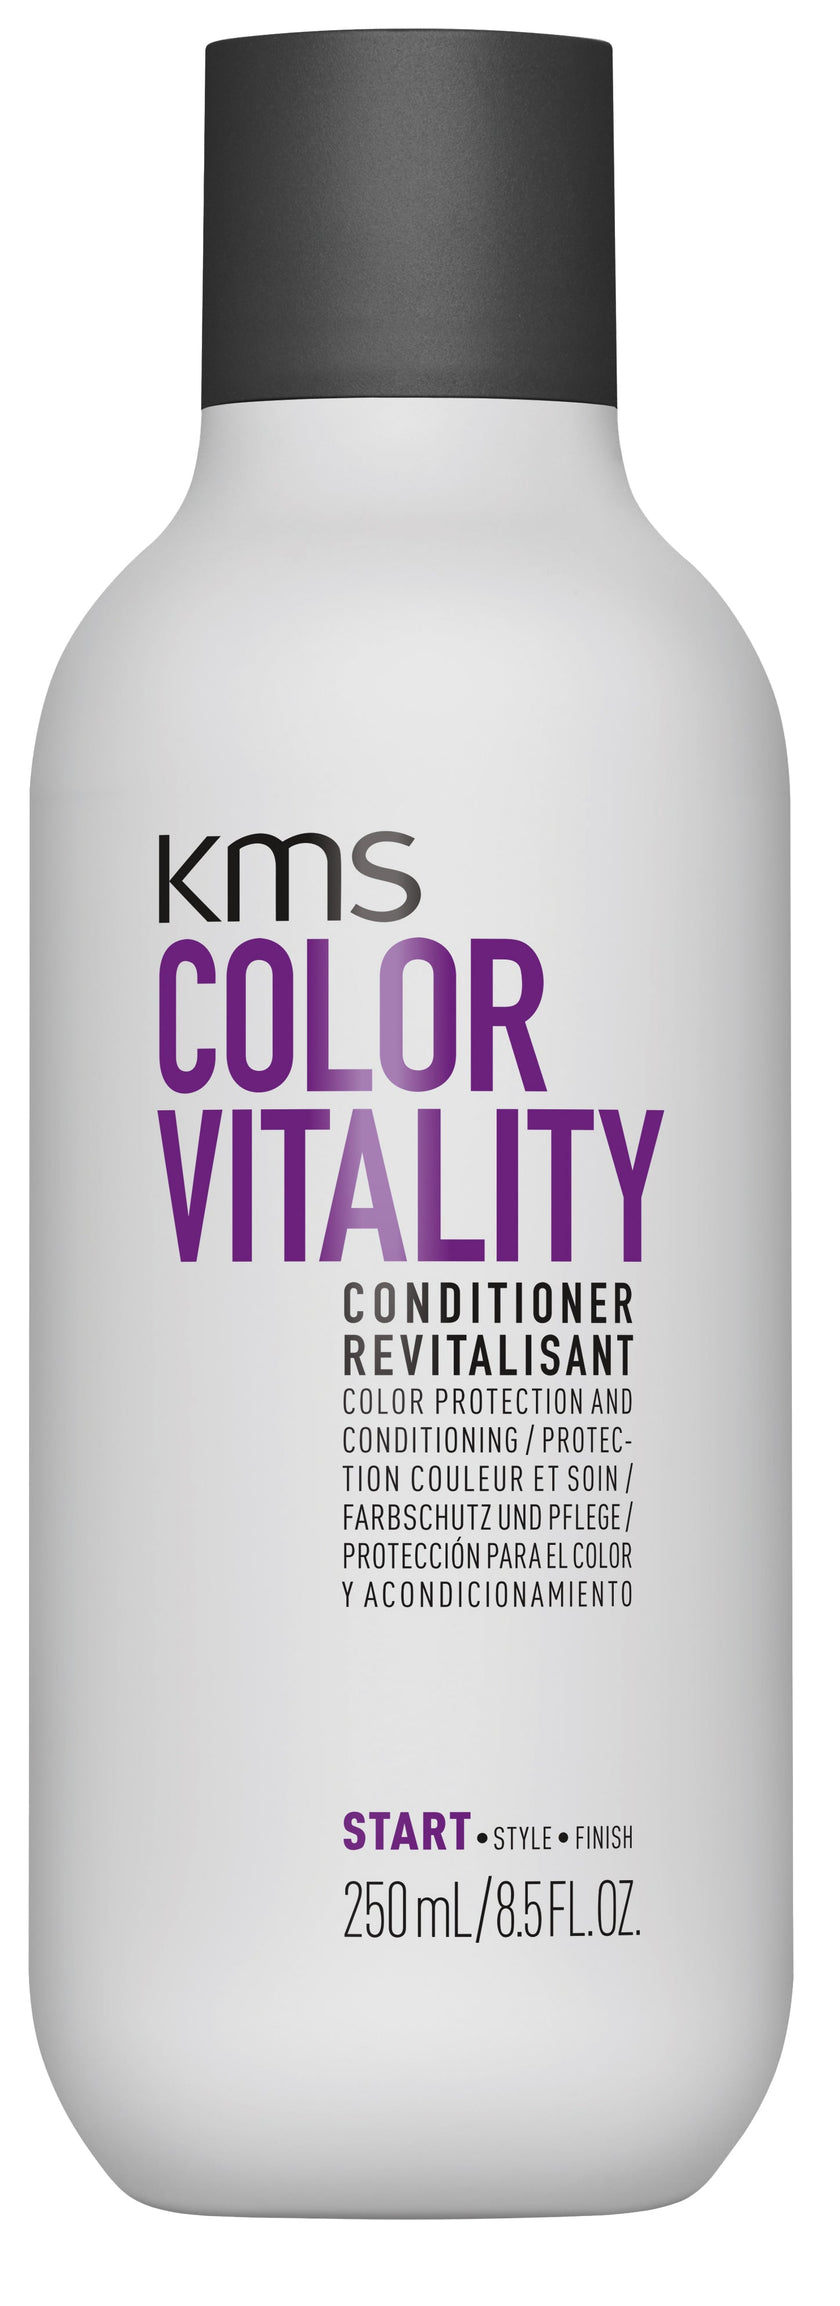 ColorVitality Conditioner Image